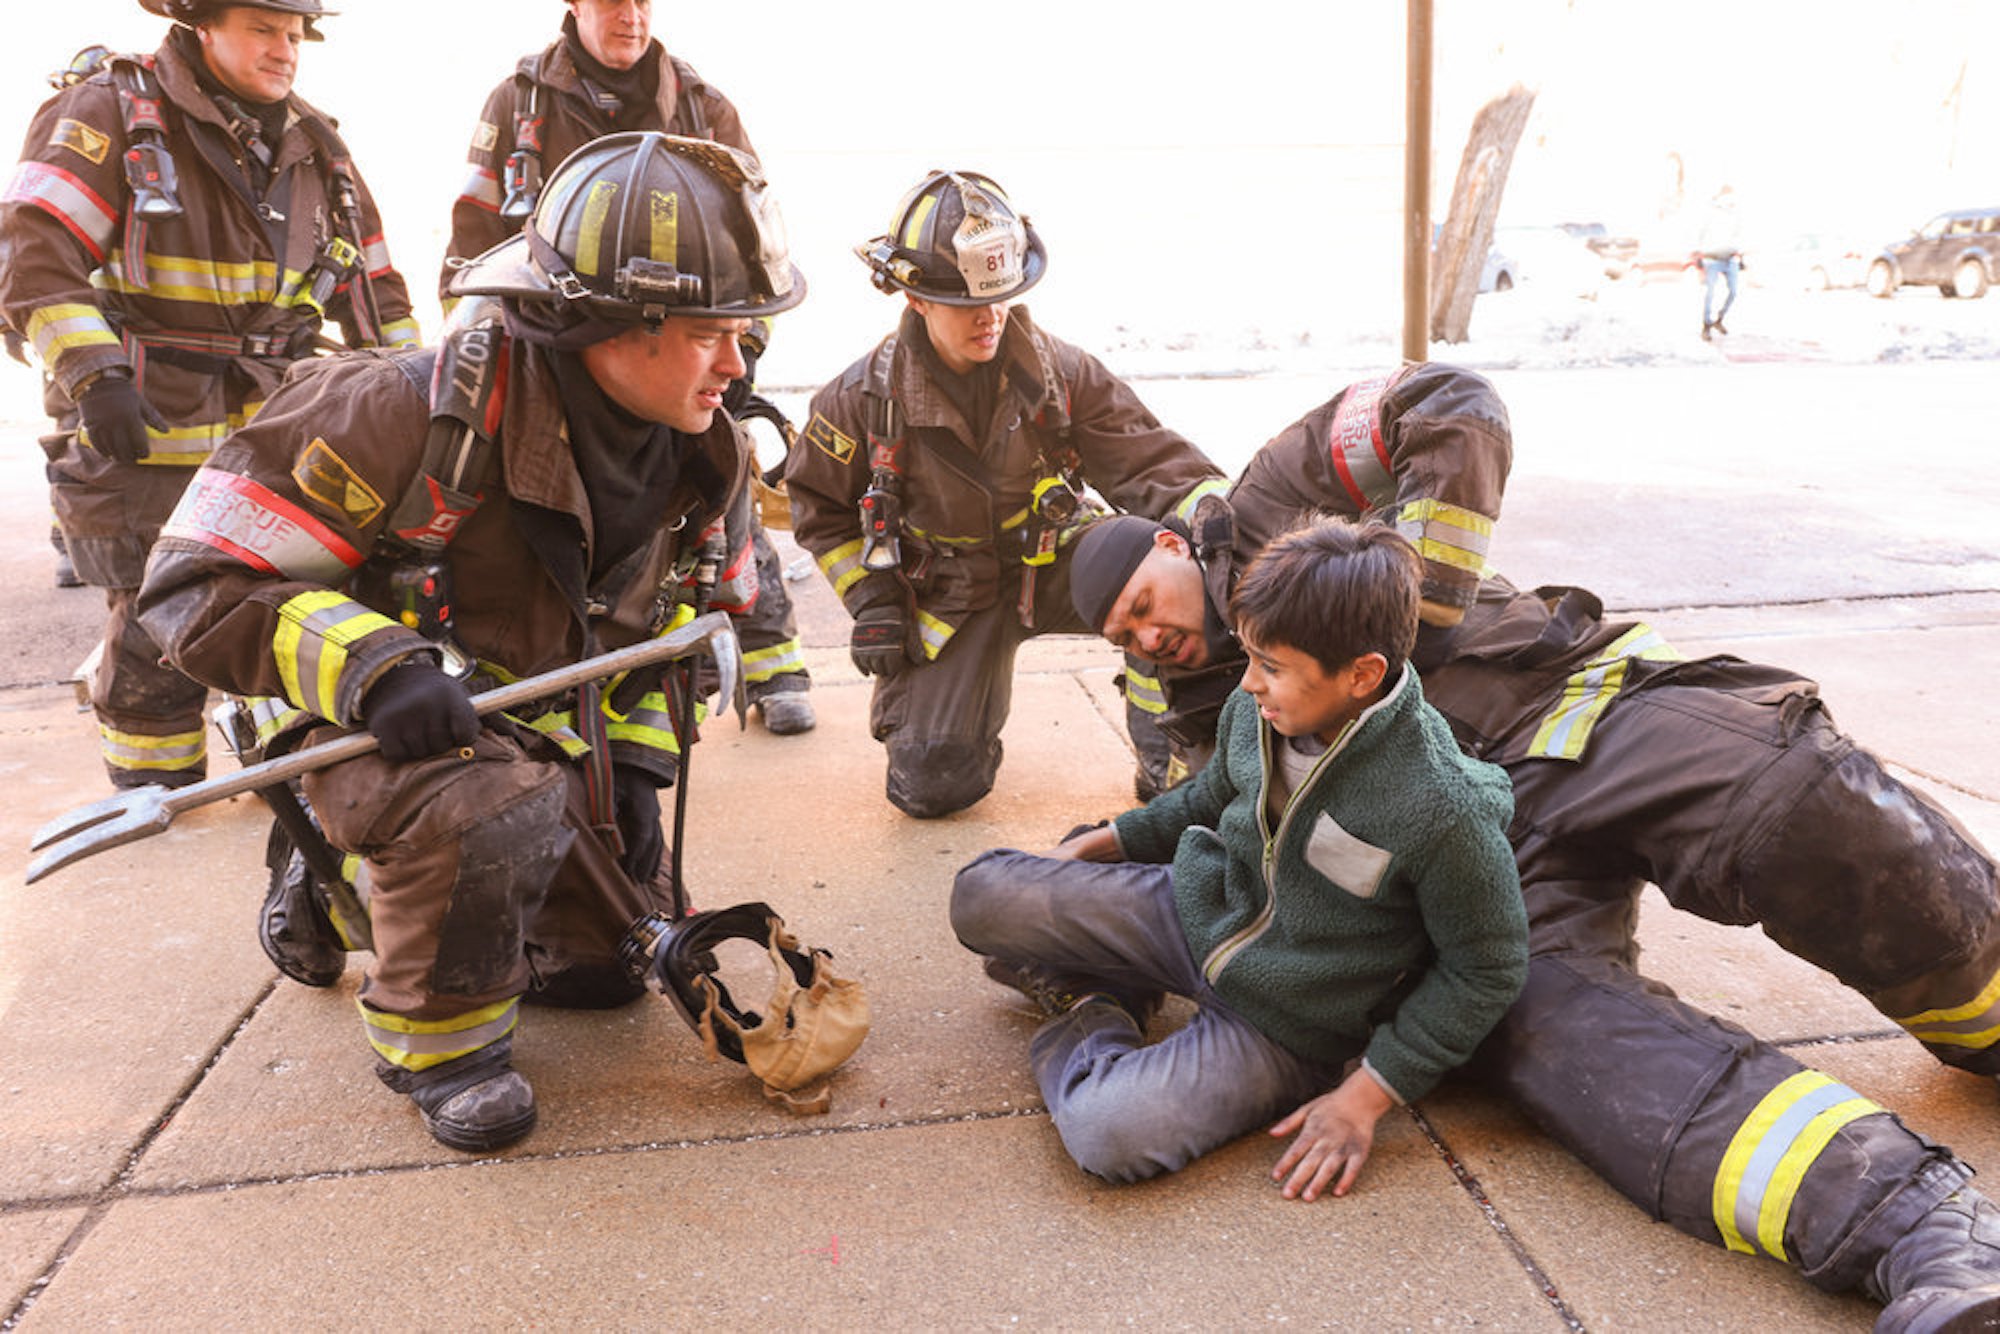 The 'Chicago Fire' Season 10 Episode 16 cast dressed in firefighting gear helping a child